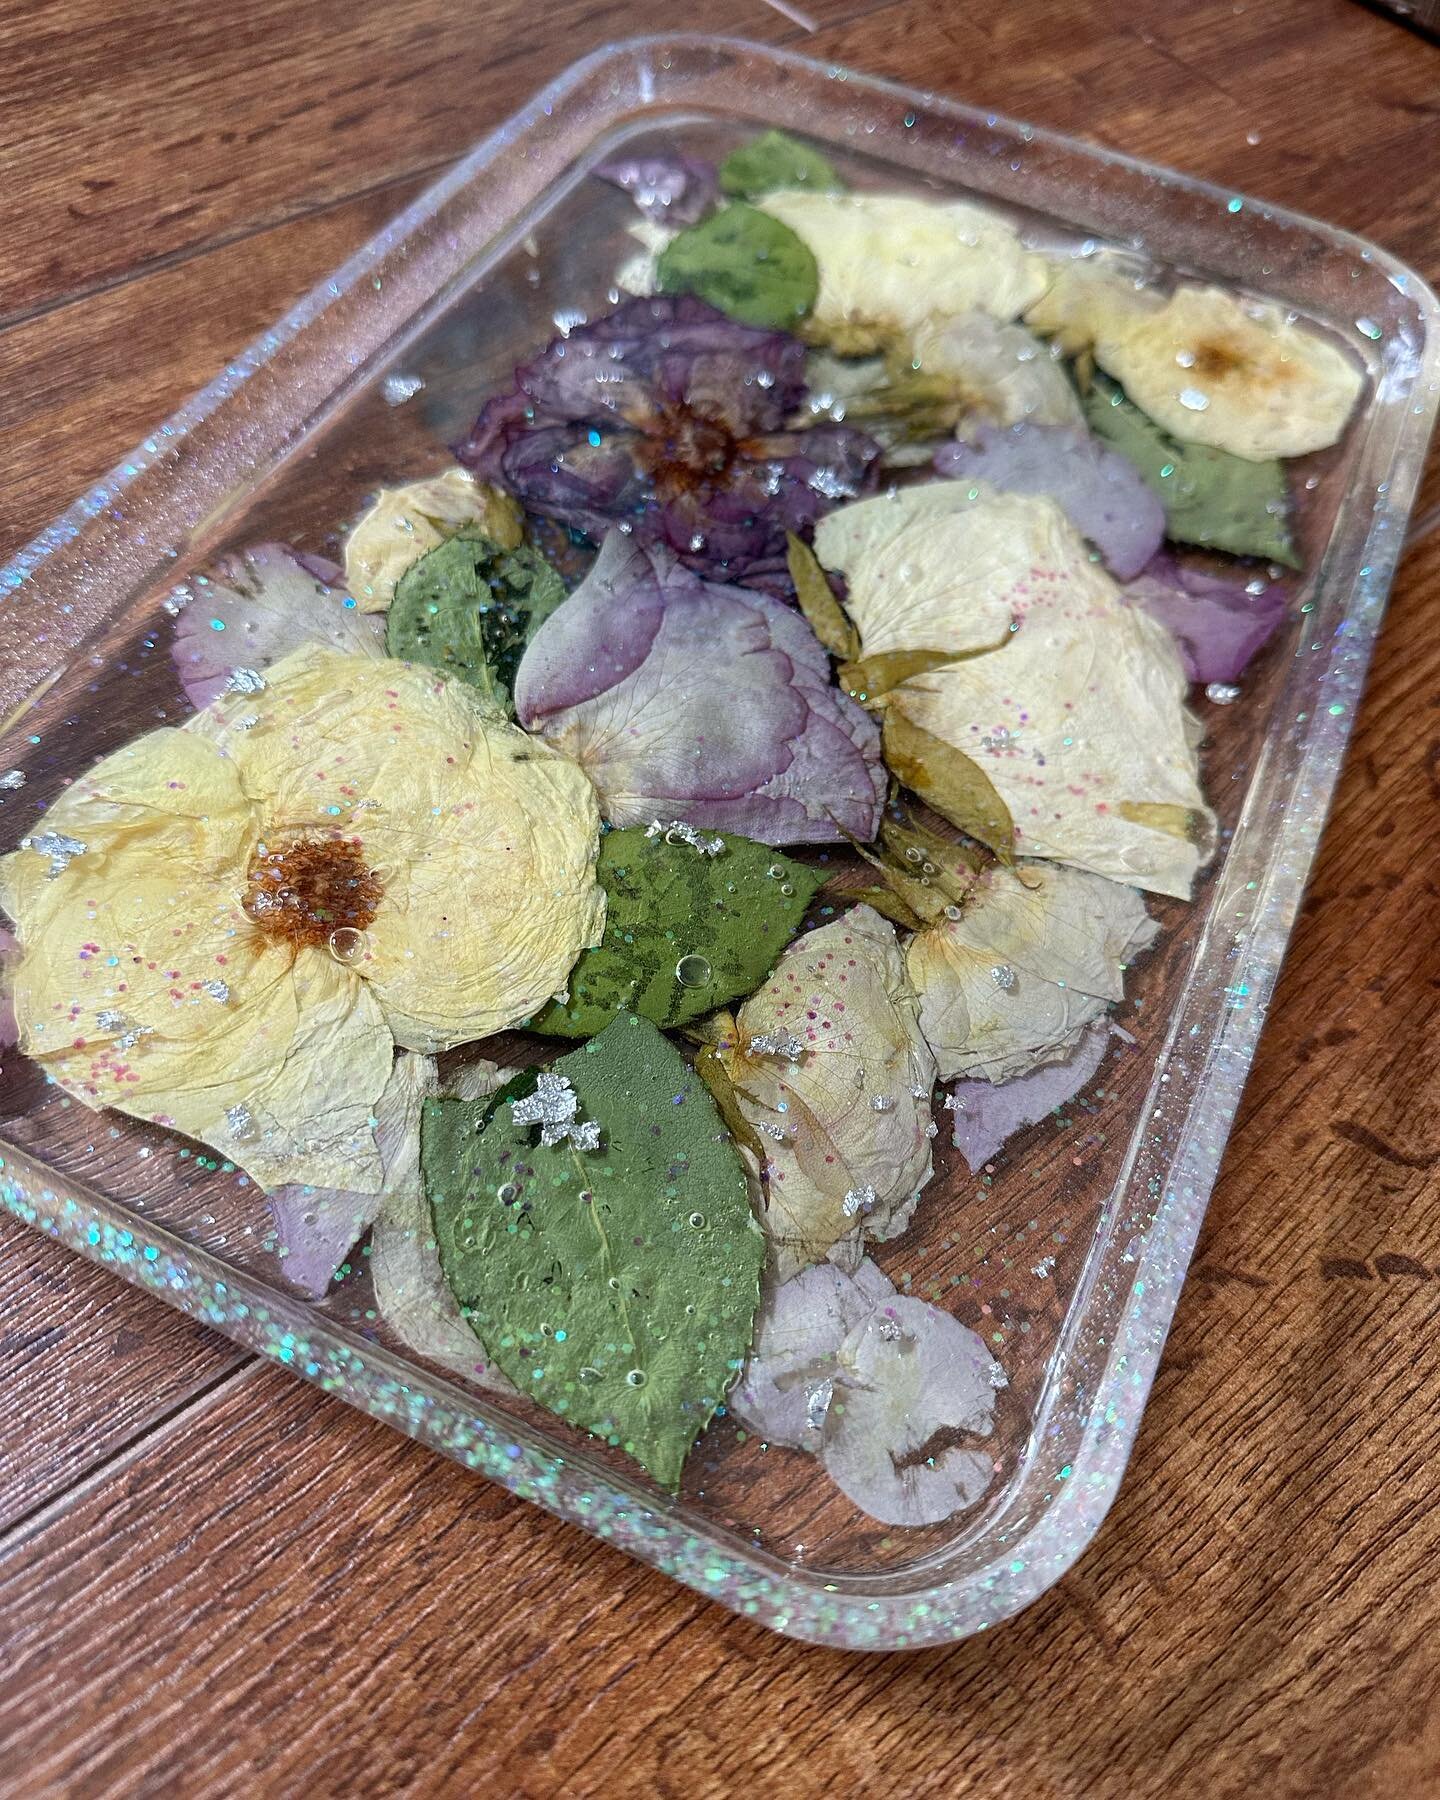 Preserving @trishna_patel04 &lsquo;s wedding bouquet in this resin tray , that she could use regularly. Drying those flowers was a challenge, but  we managed . 
#freshflowerbouquet #resinart #preservebouquets #stringedpetals